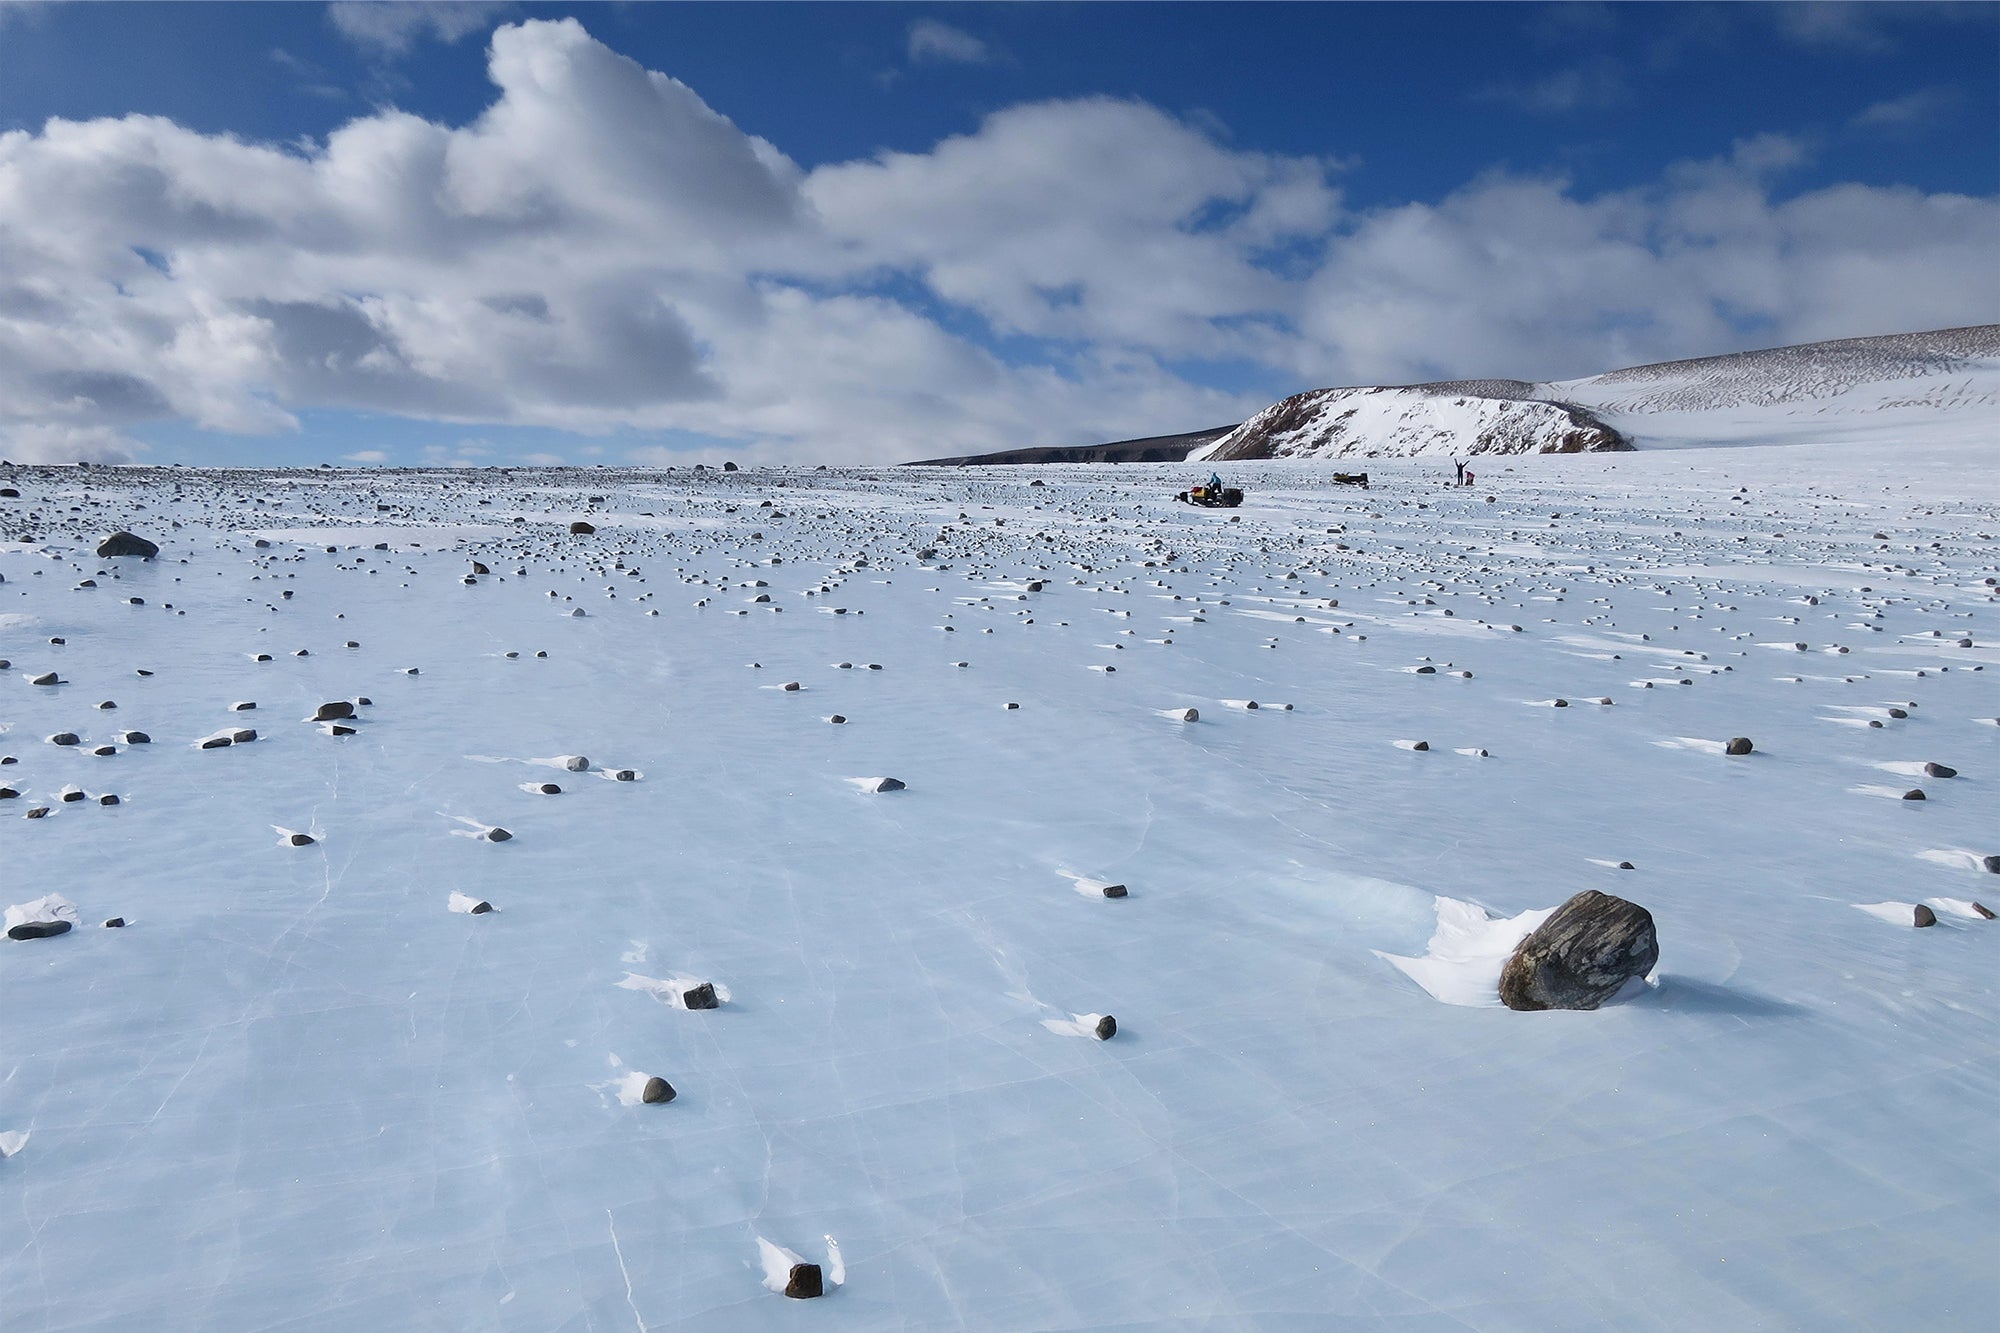 Daytime photograph of an ice field in Antarctica where dark colored meteorites strongly contrast visually against the bright blue-ish white ice surface